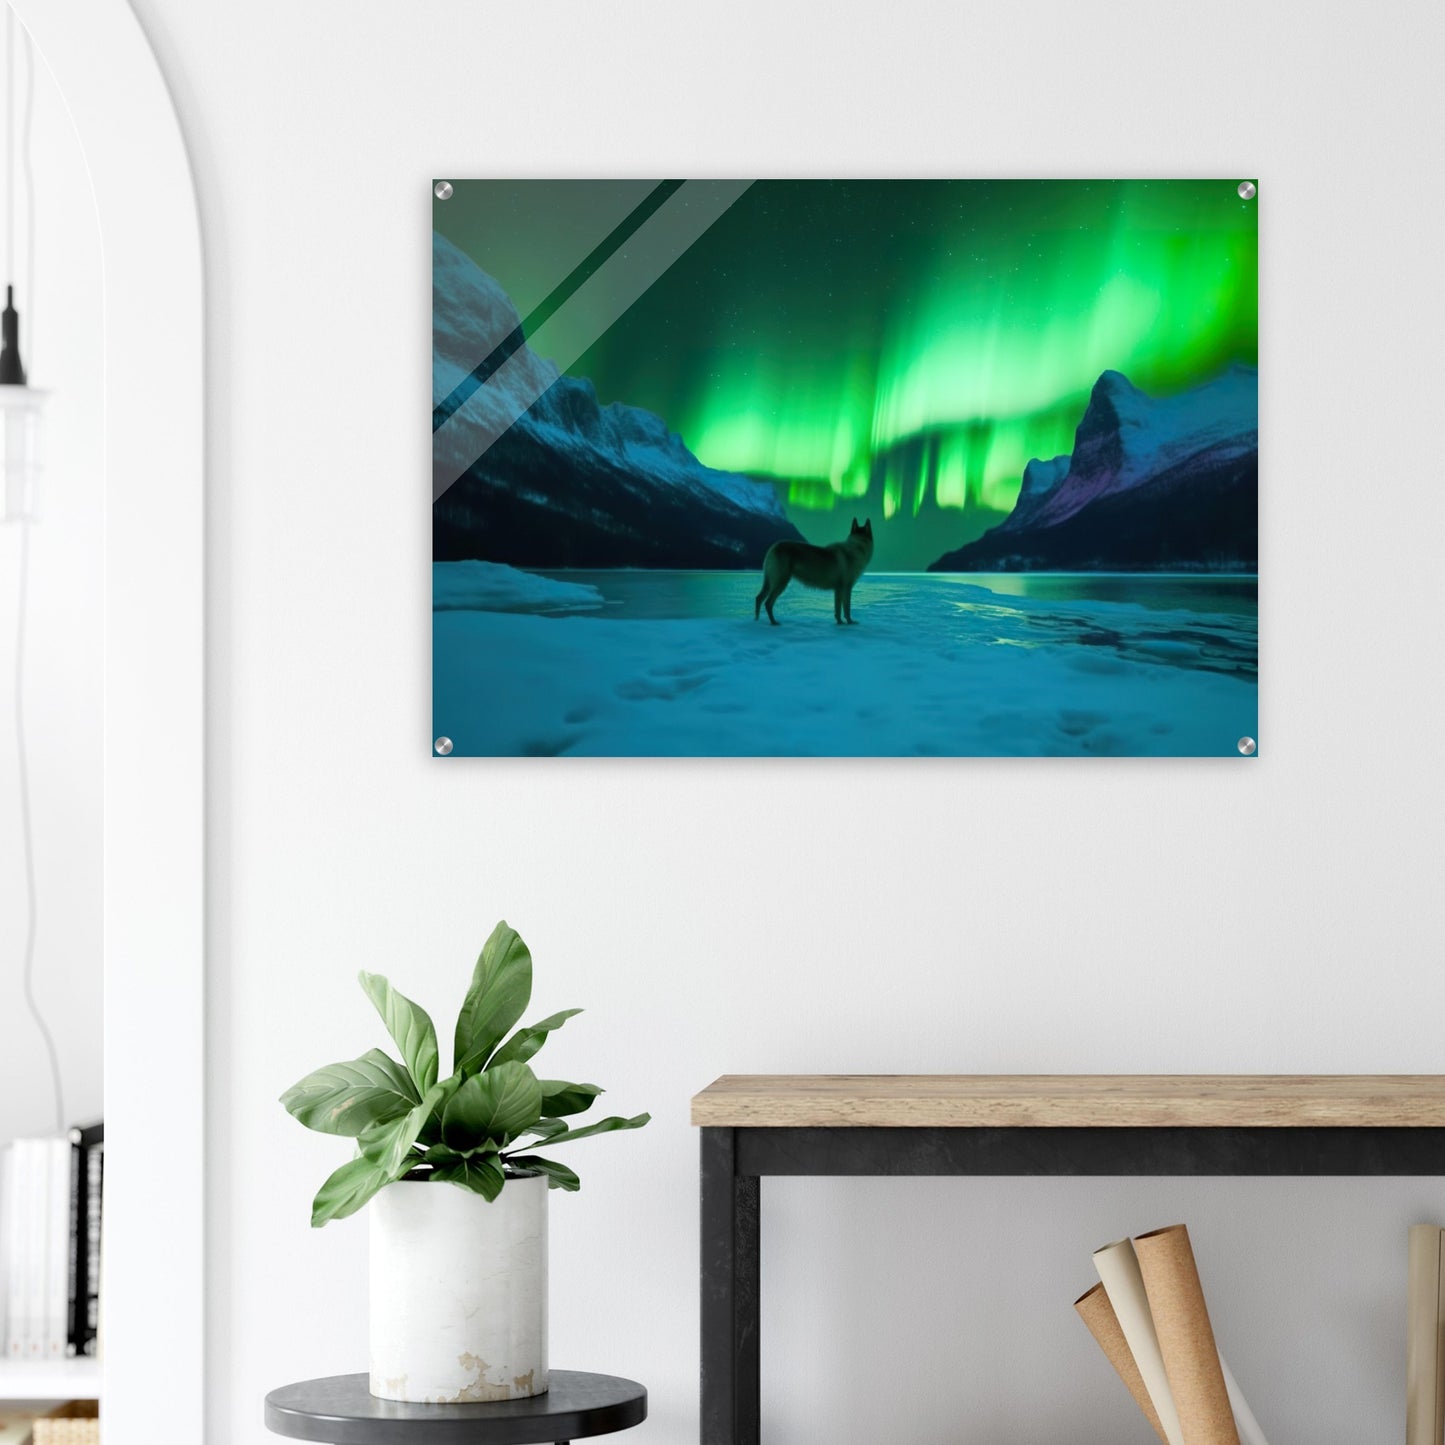 Unique Aurora Borealis Acrylic Prints - Multi Size Personalized Northern Light View - Modern Wall Art - Perfect Aurora Lovers Gift 2